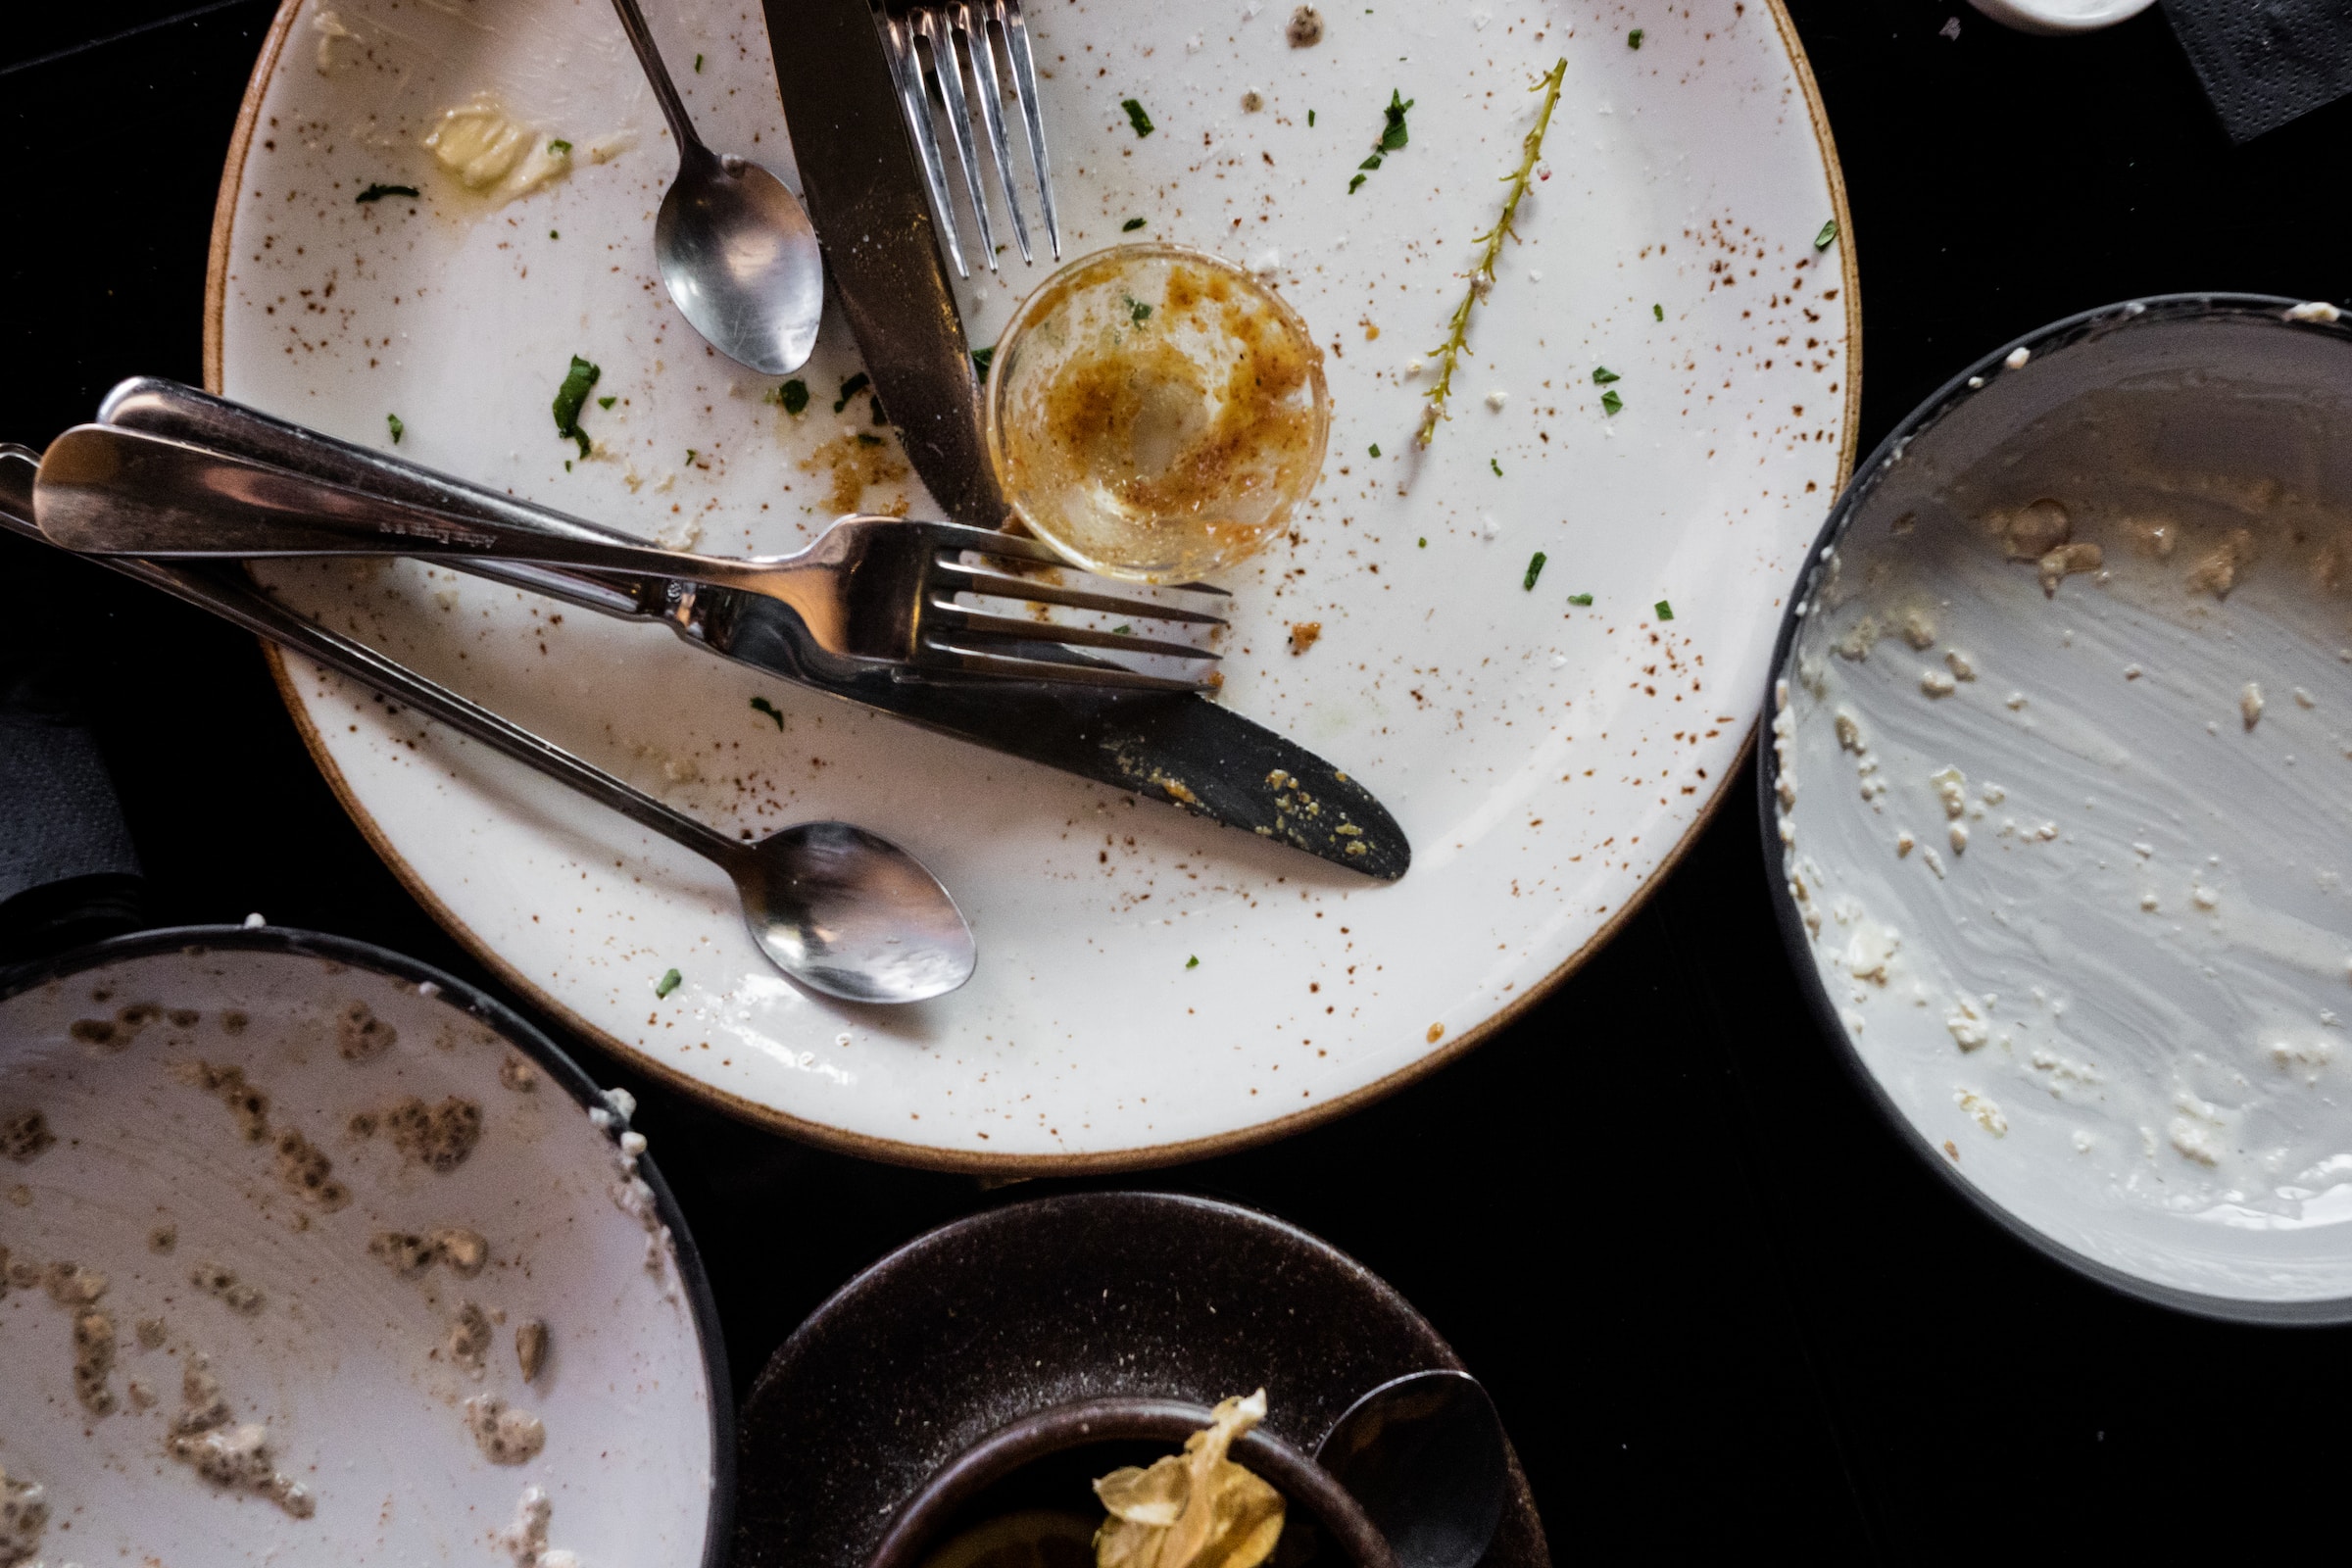 Dirty and empty dishes at restaurant | Source: Unsplash